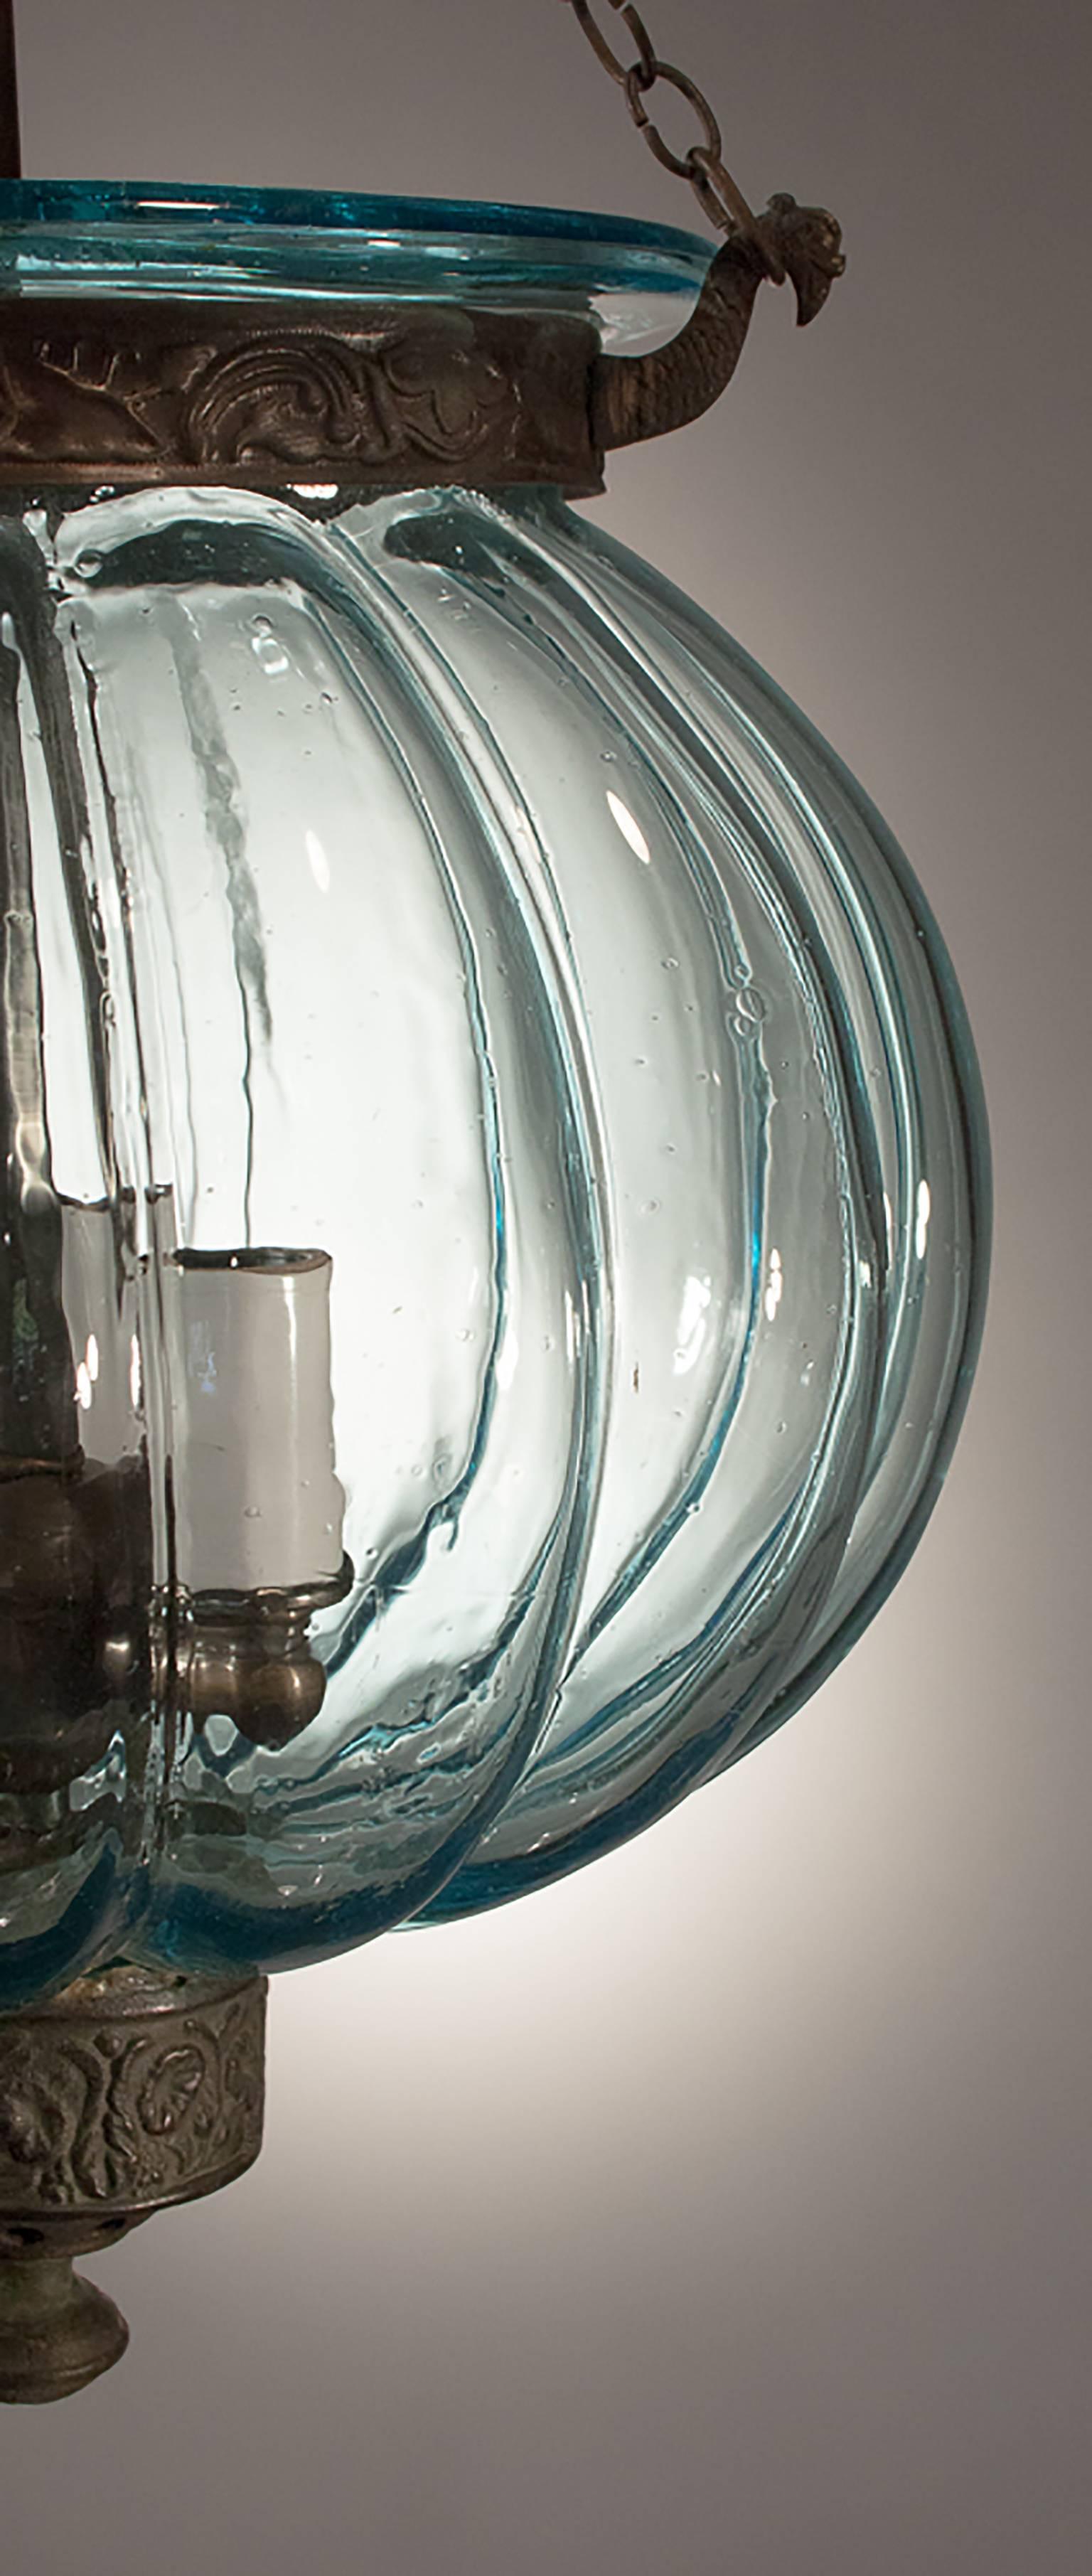 Hand blown in Belgium, circa 1860, the aqua tint of this melon bell jar reflects a warm light. The lantern has its original decorative smoke bell and embossed brass details, including a slightly askew finial. An acid-etched indicia on the glass says